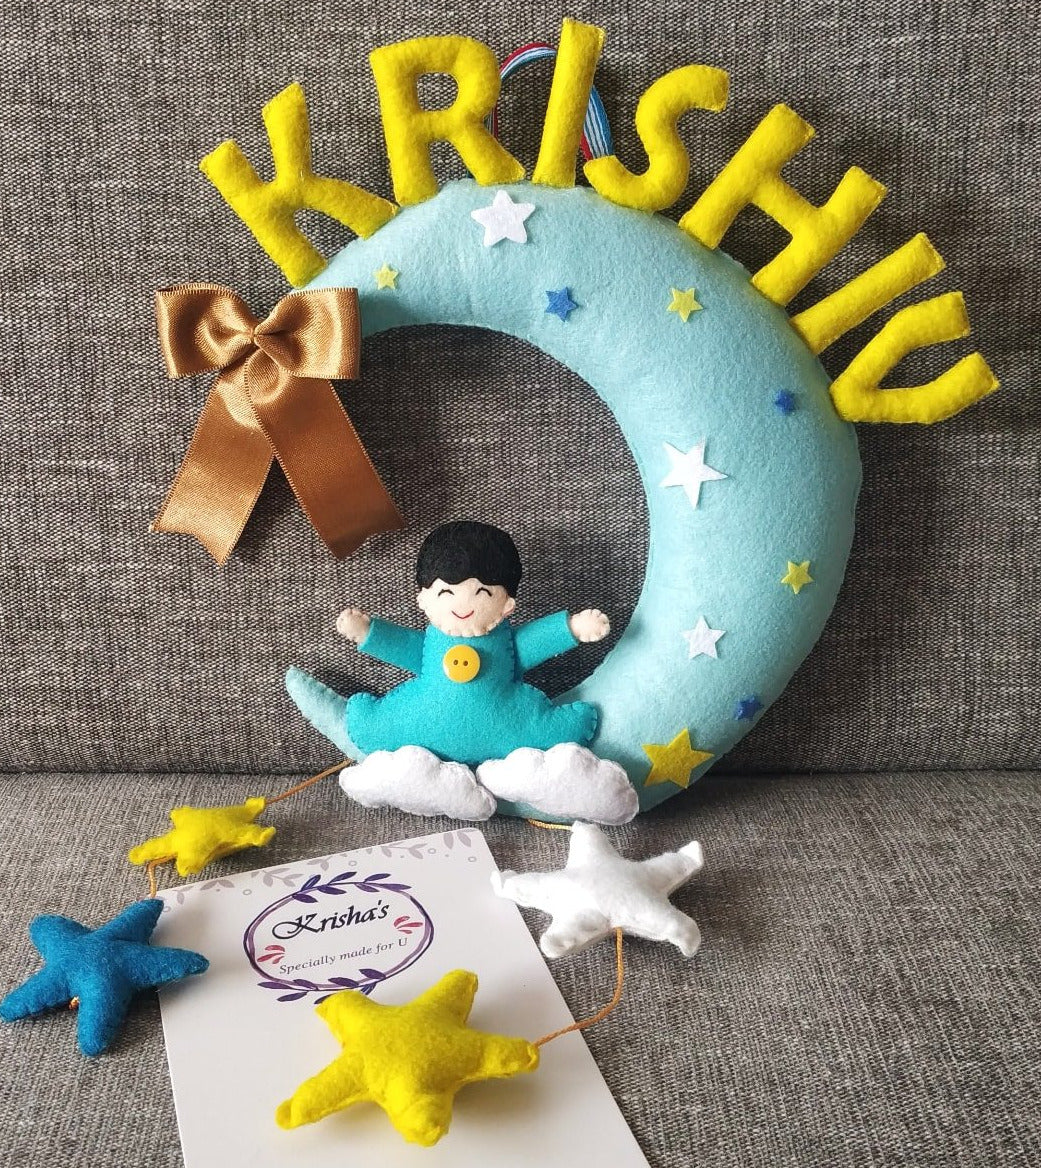 Personalized name bunting. Name bunting for nursery. Name bunting for bedroom. Felt name bunting. Children name bunting. Superhero bunting. Handmade gifts. Handmade bunting. Personalized décor. Nursery decoration. Nursery ideas.  Moon wall décor. Moon decorations.  Moon wall hanging. 